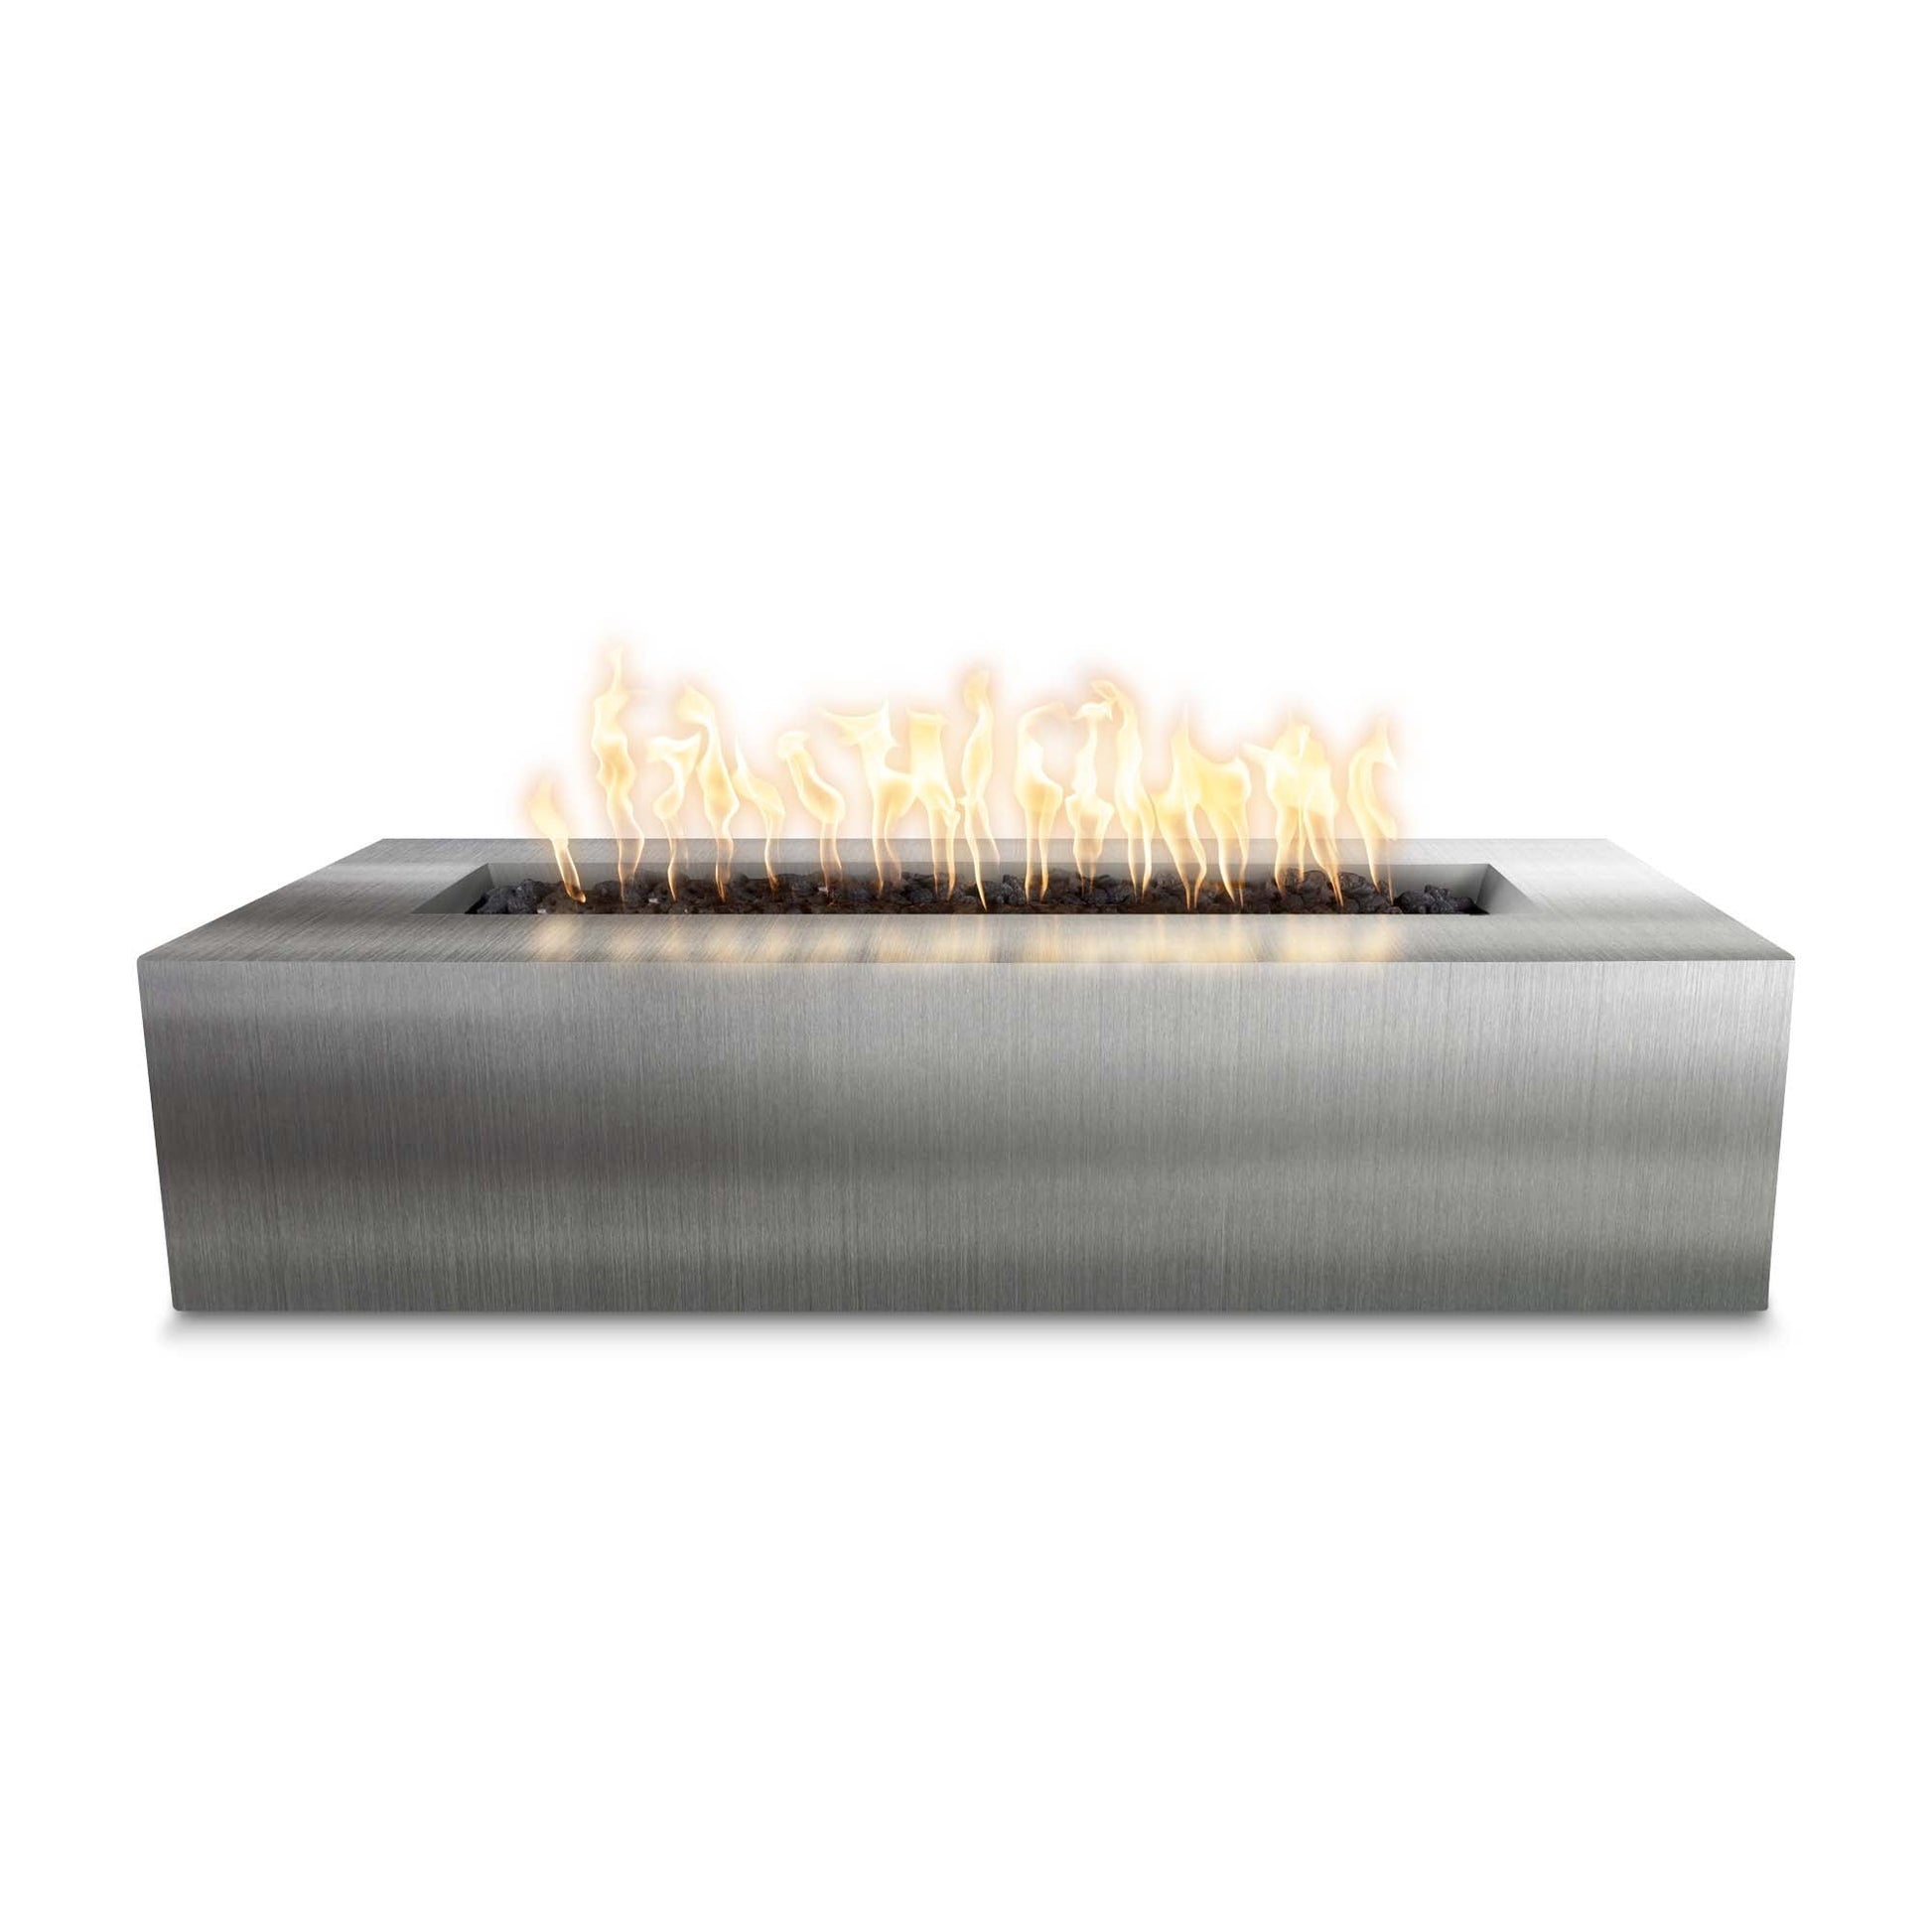 The Outdoor Plus Rectangular Regal 48" Stainless Steel Liquid Propane Fire Pit with Flame Sense with Spark Ignition